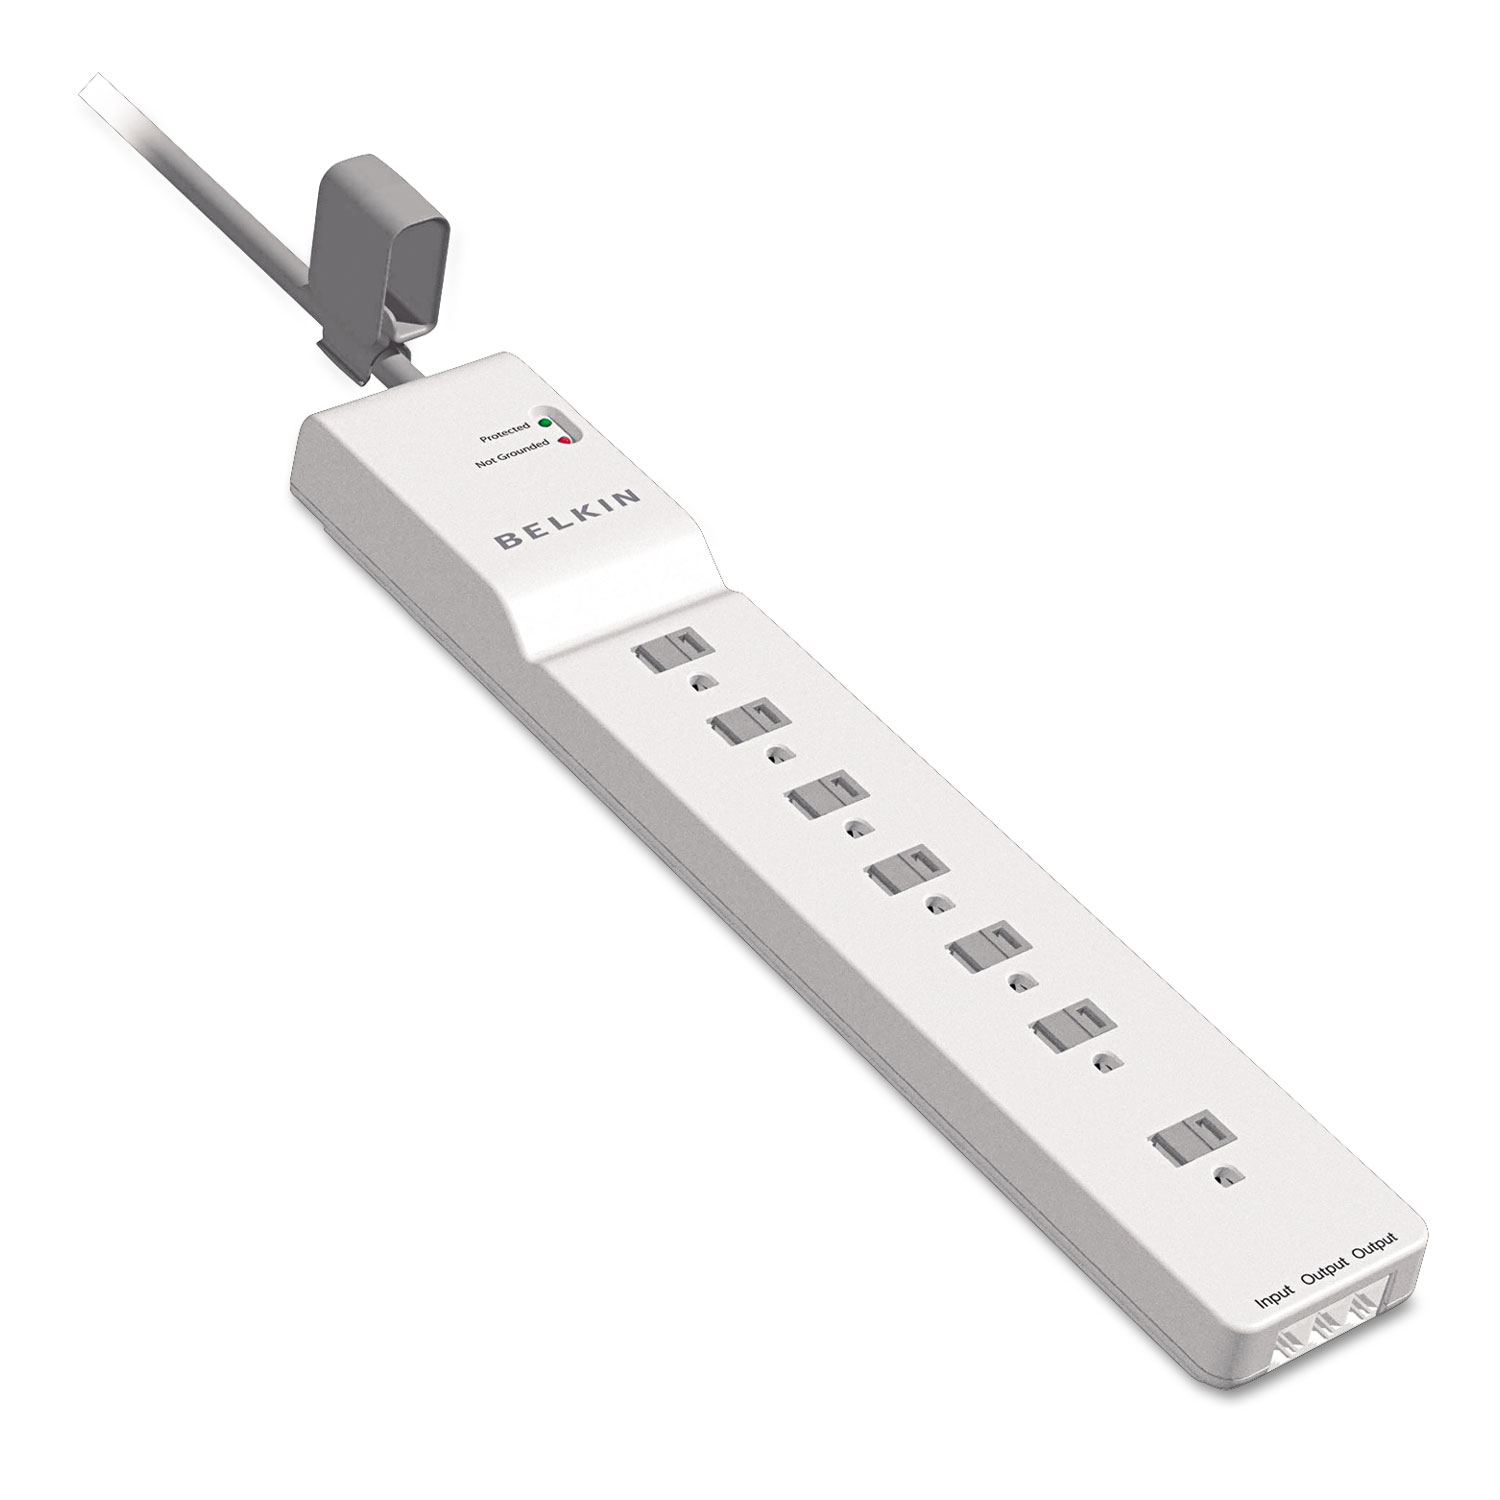  Belkin BE107200-06 Home/Office Surge Protector, 7 Outlets, 6 ft Cord, 2320 Joules, White (BLKBE10720006) 